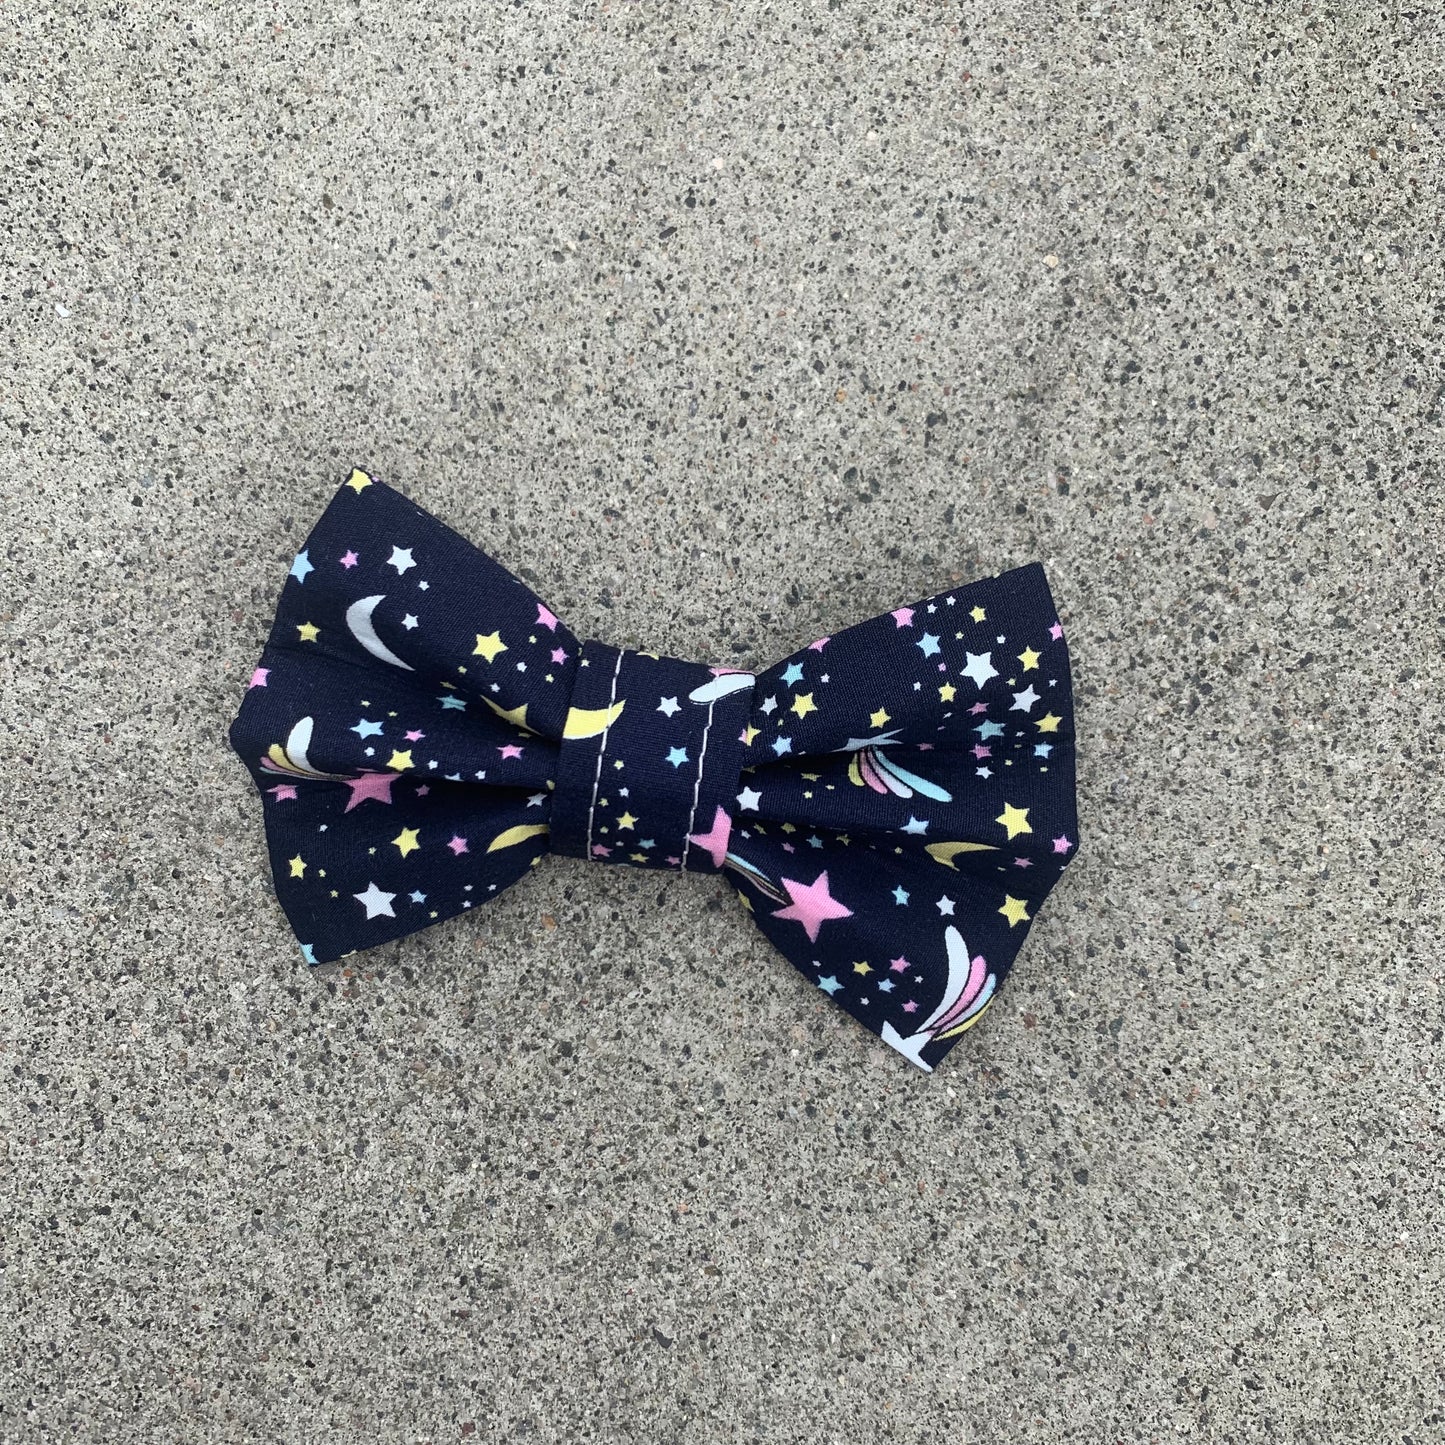 STAR - Blue/Navy Shooting Star and Moon Bow Tie or Hair Bow to fit Collar